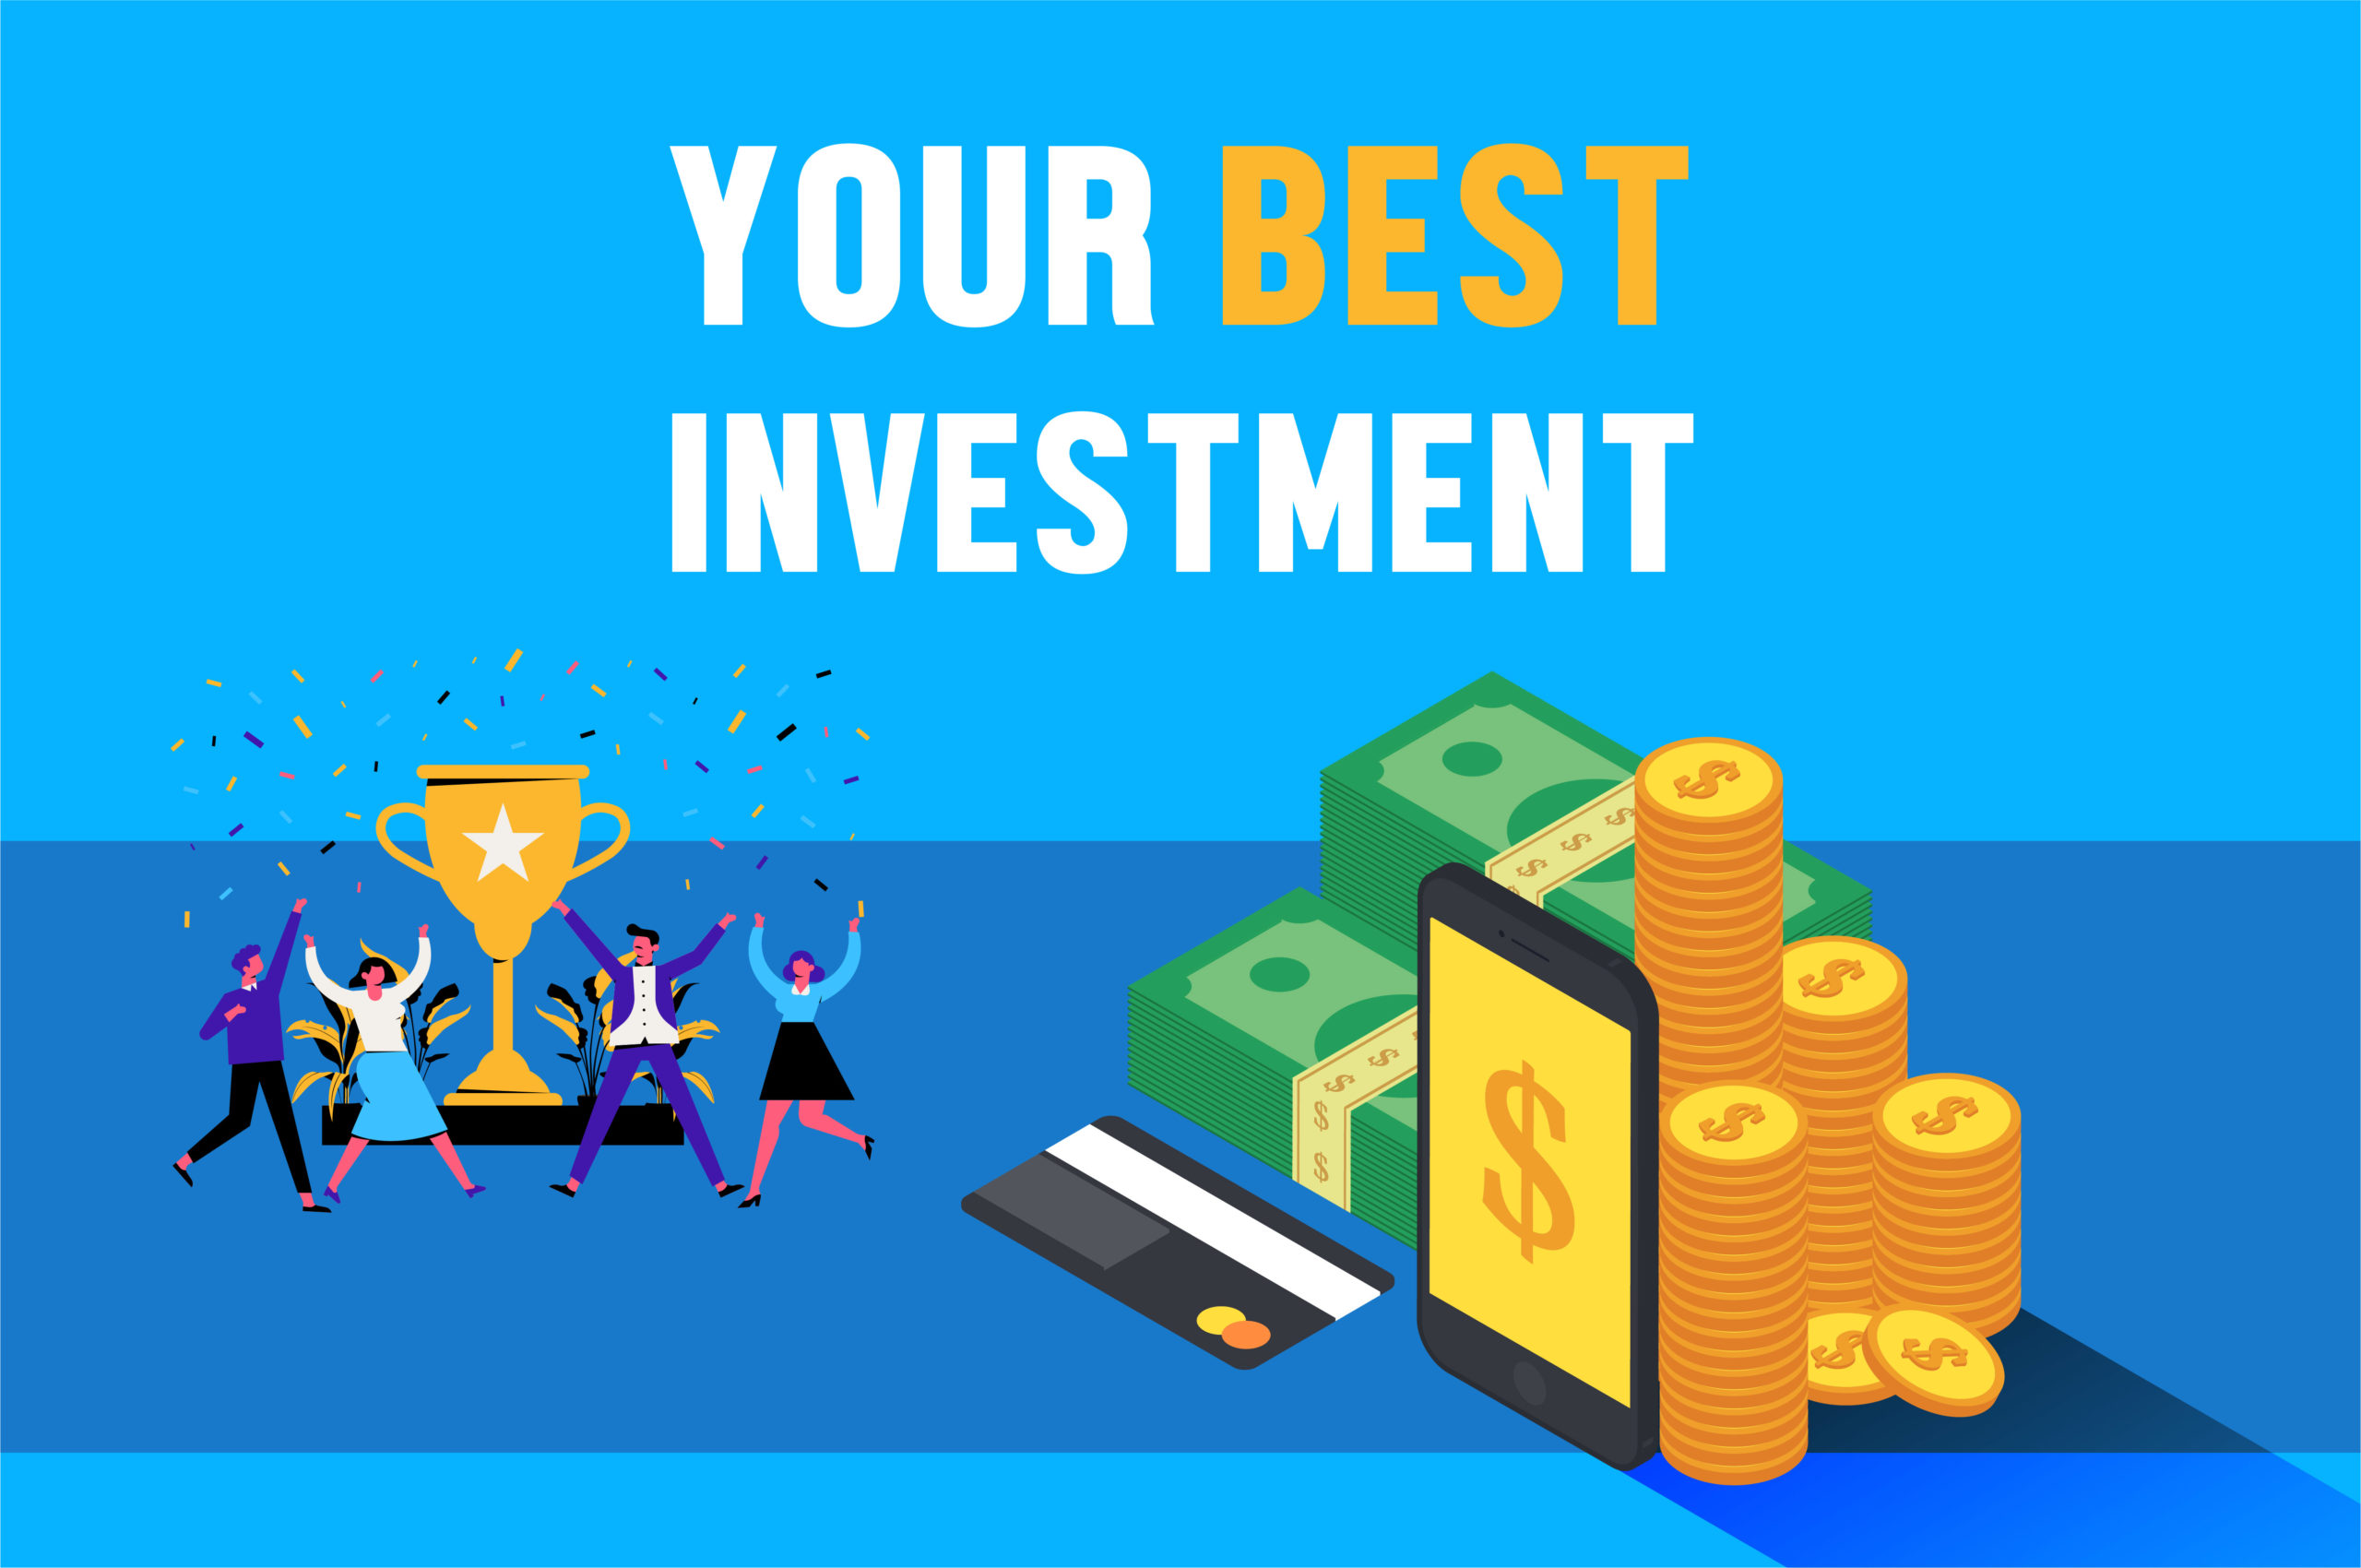 Your best investment